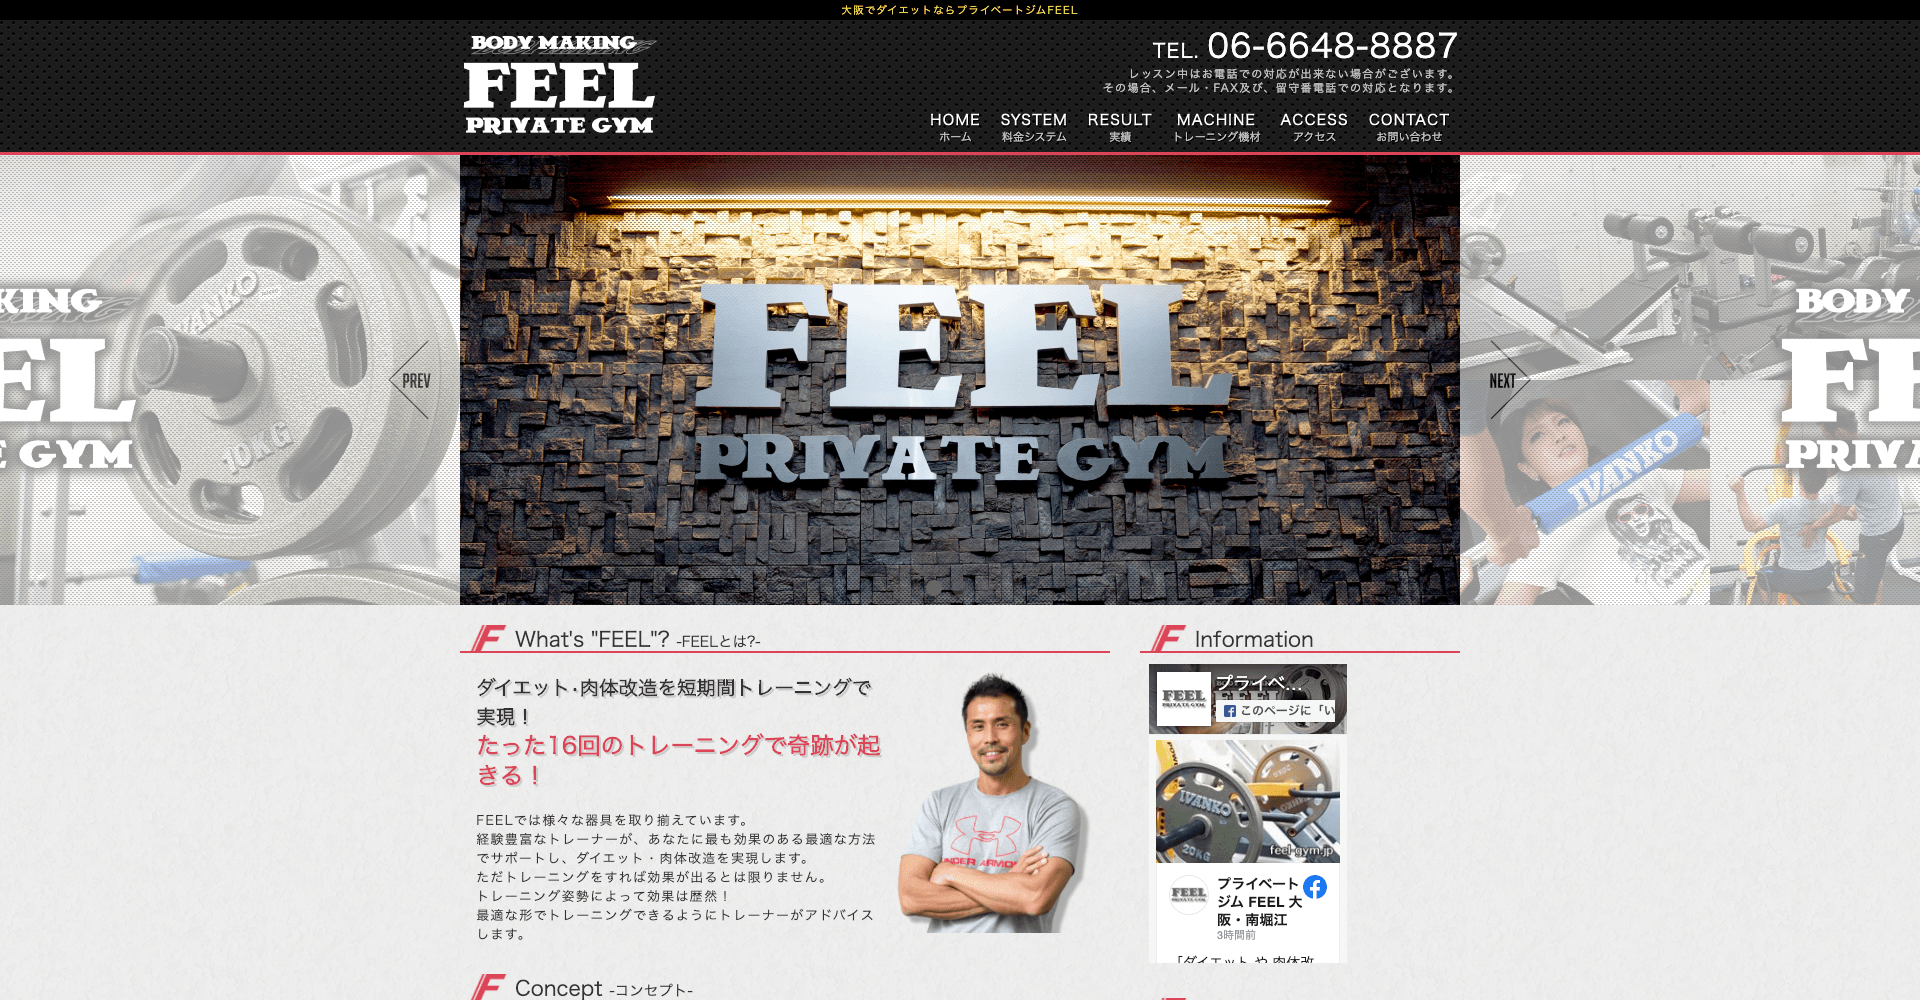 Body Making FEEL Private GYM